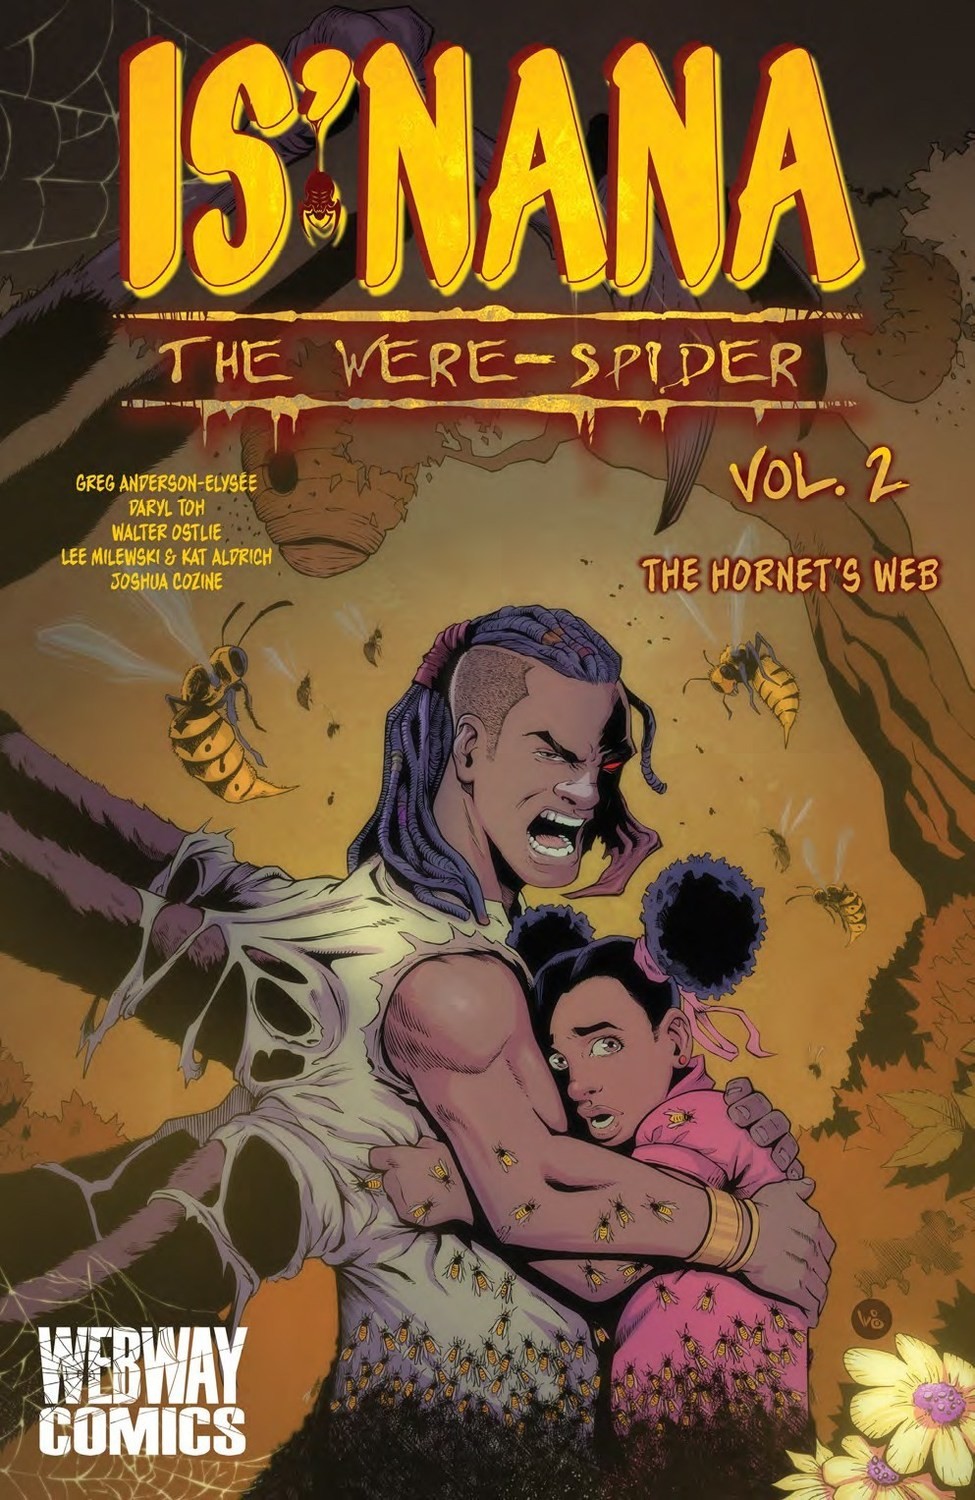 Is'nana the Were-Spider Vol 2: The Hornet's Web Trade Paperback